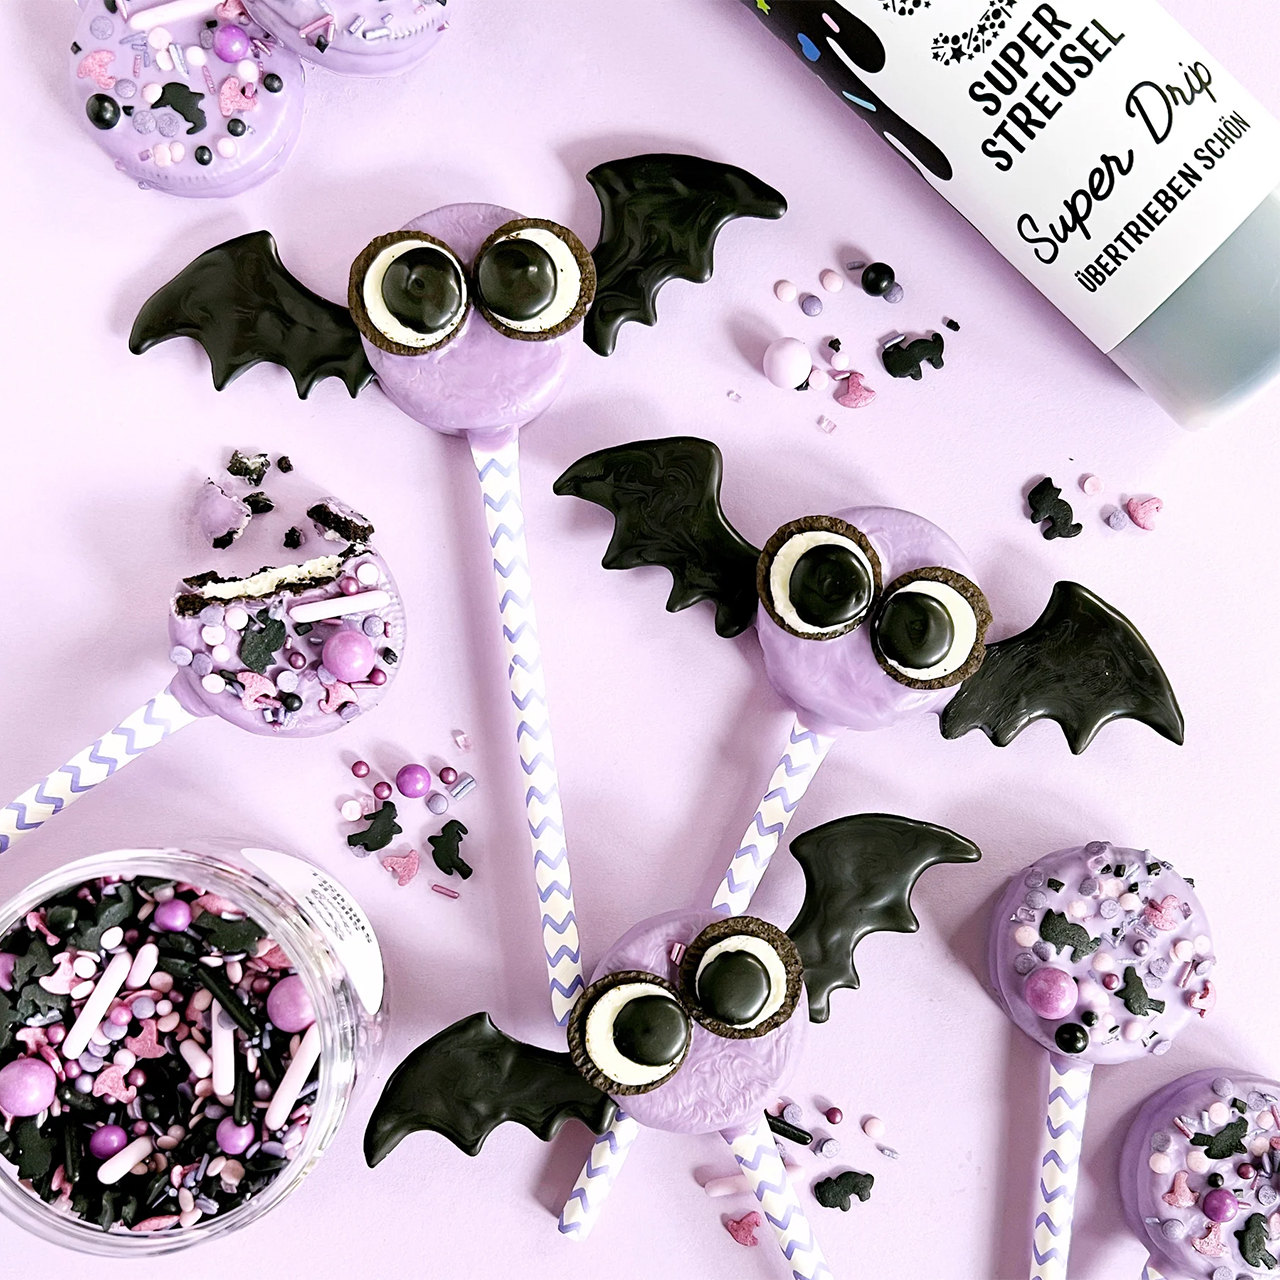 Cake Decorating Set - Wicked Witch